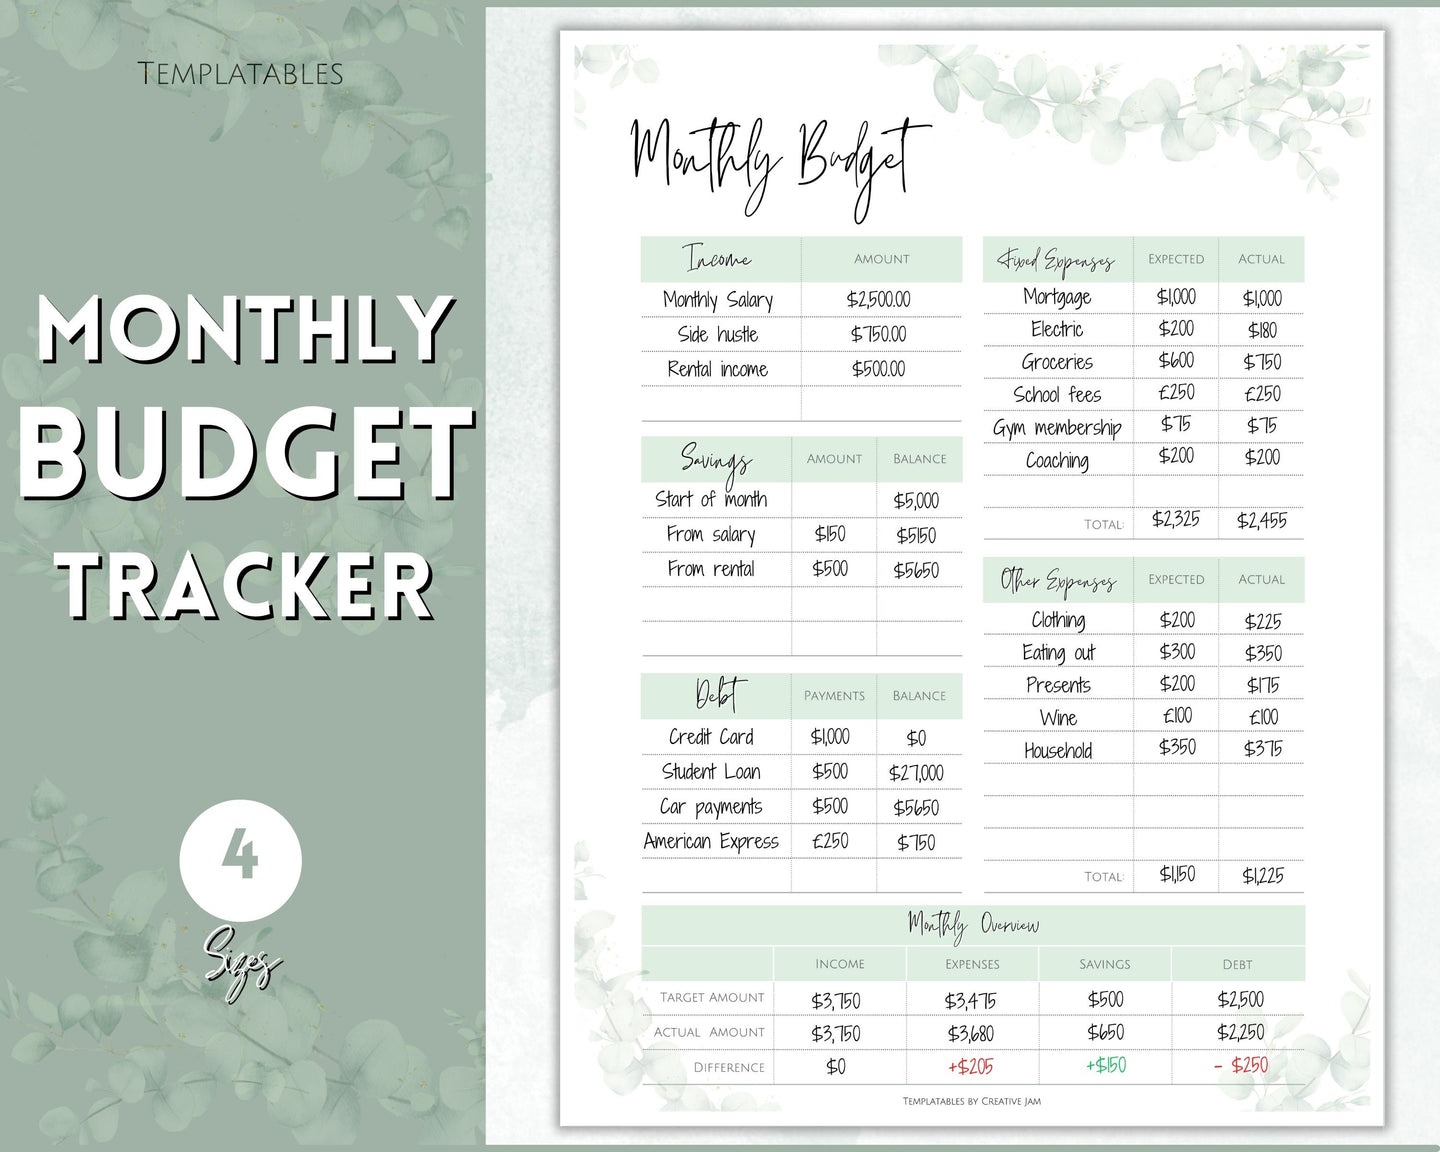 Monthly Budget Planner Printable | Financial Income, Expenses, Debt, Paycheck & Savings Tracker Template | Green Eucalyptus